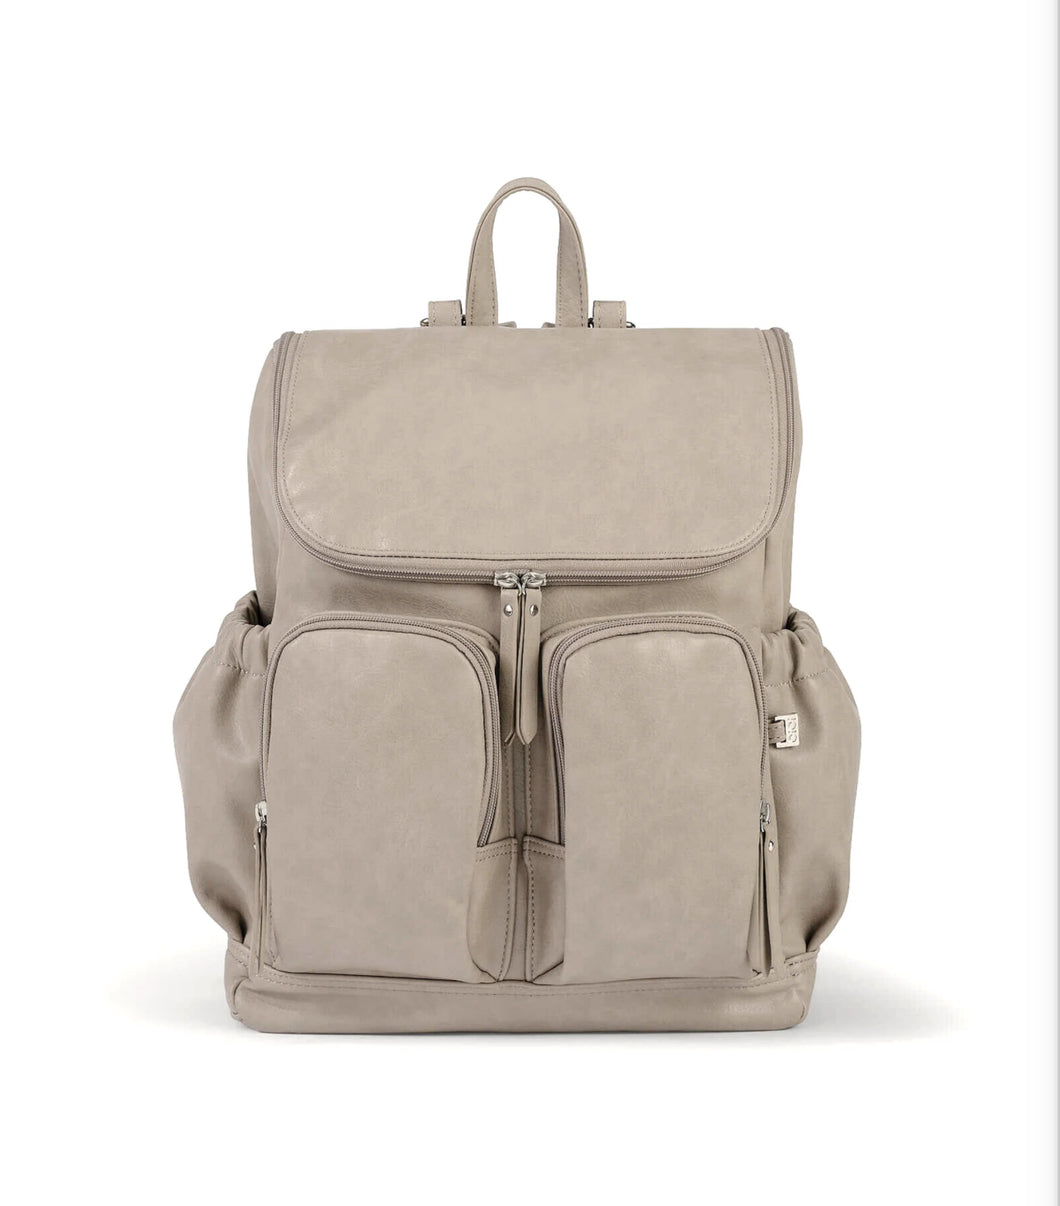 Signature Nappy Backpack - Taupe Faux Leather